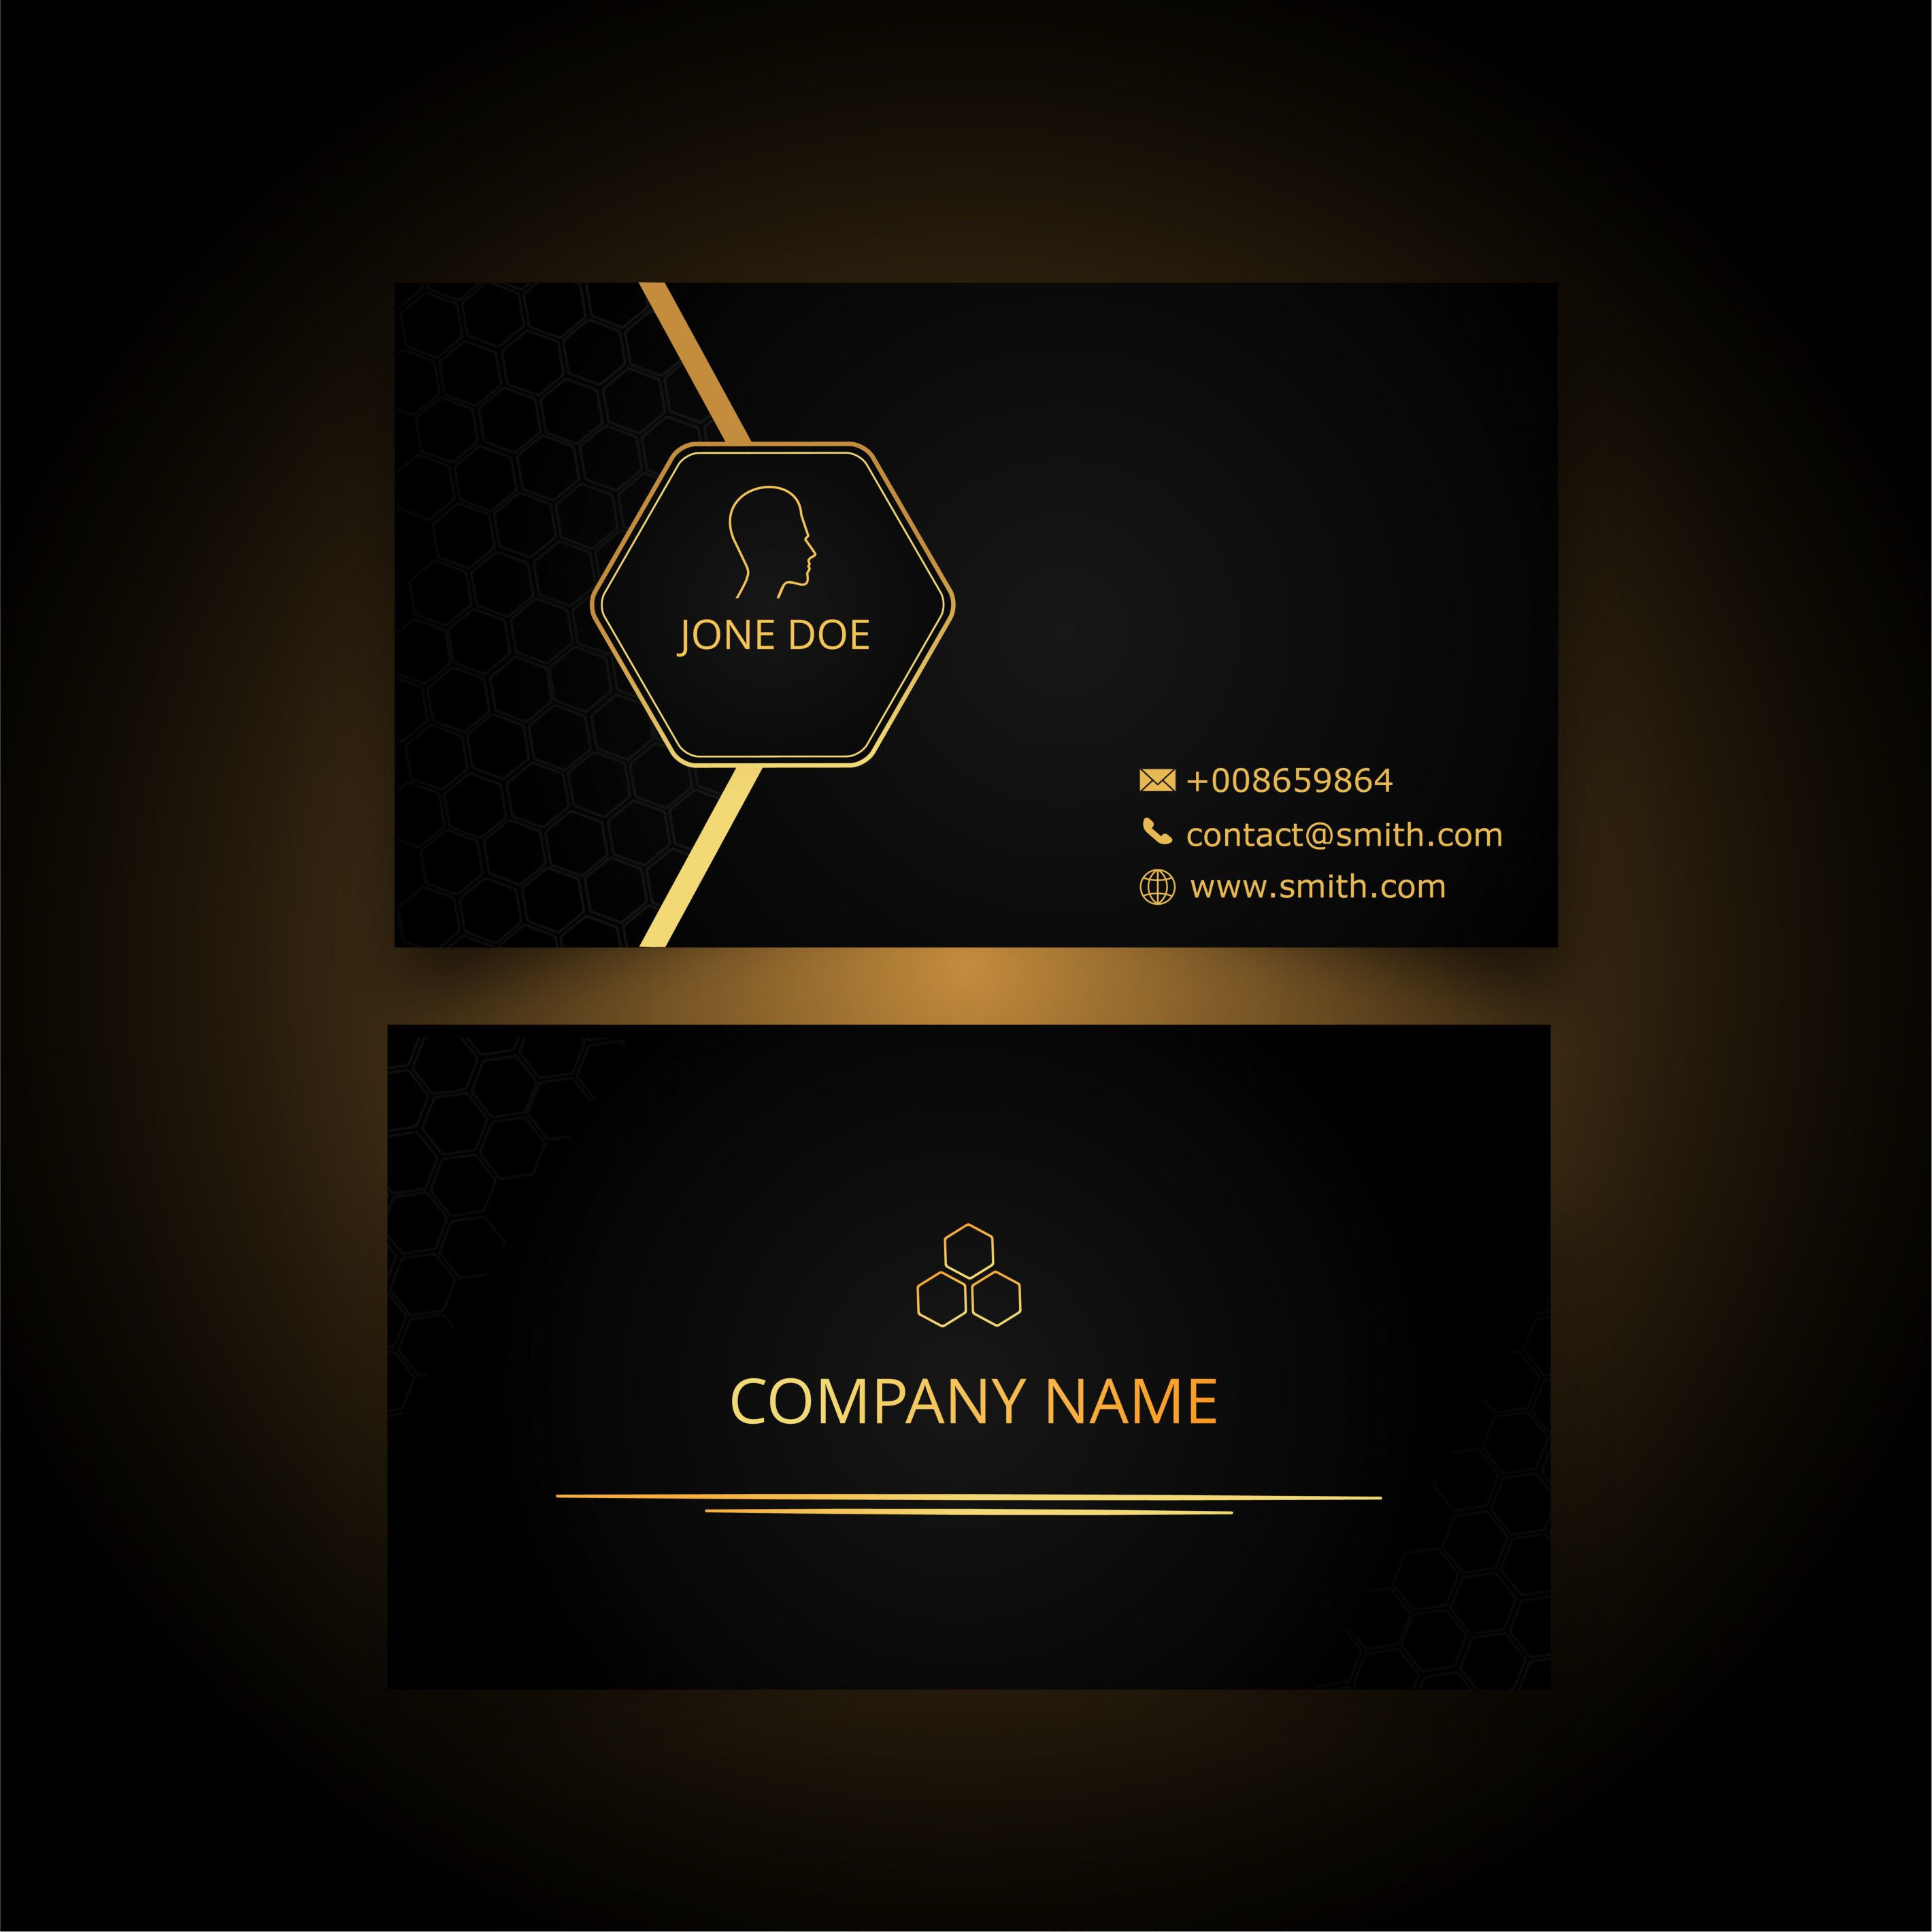 Modern Business Card Template Available On Freepik Of Business Card Printer Template